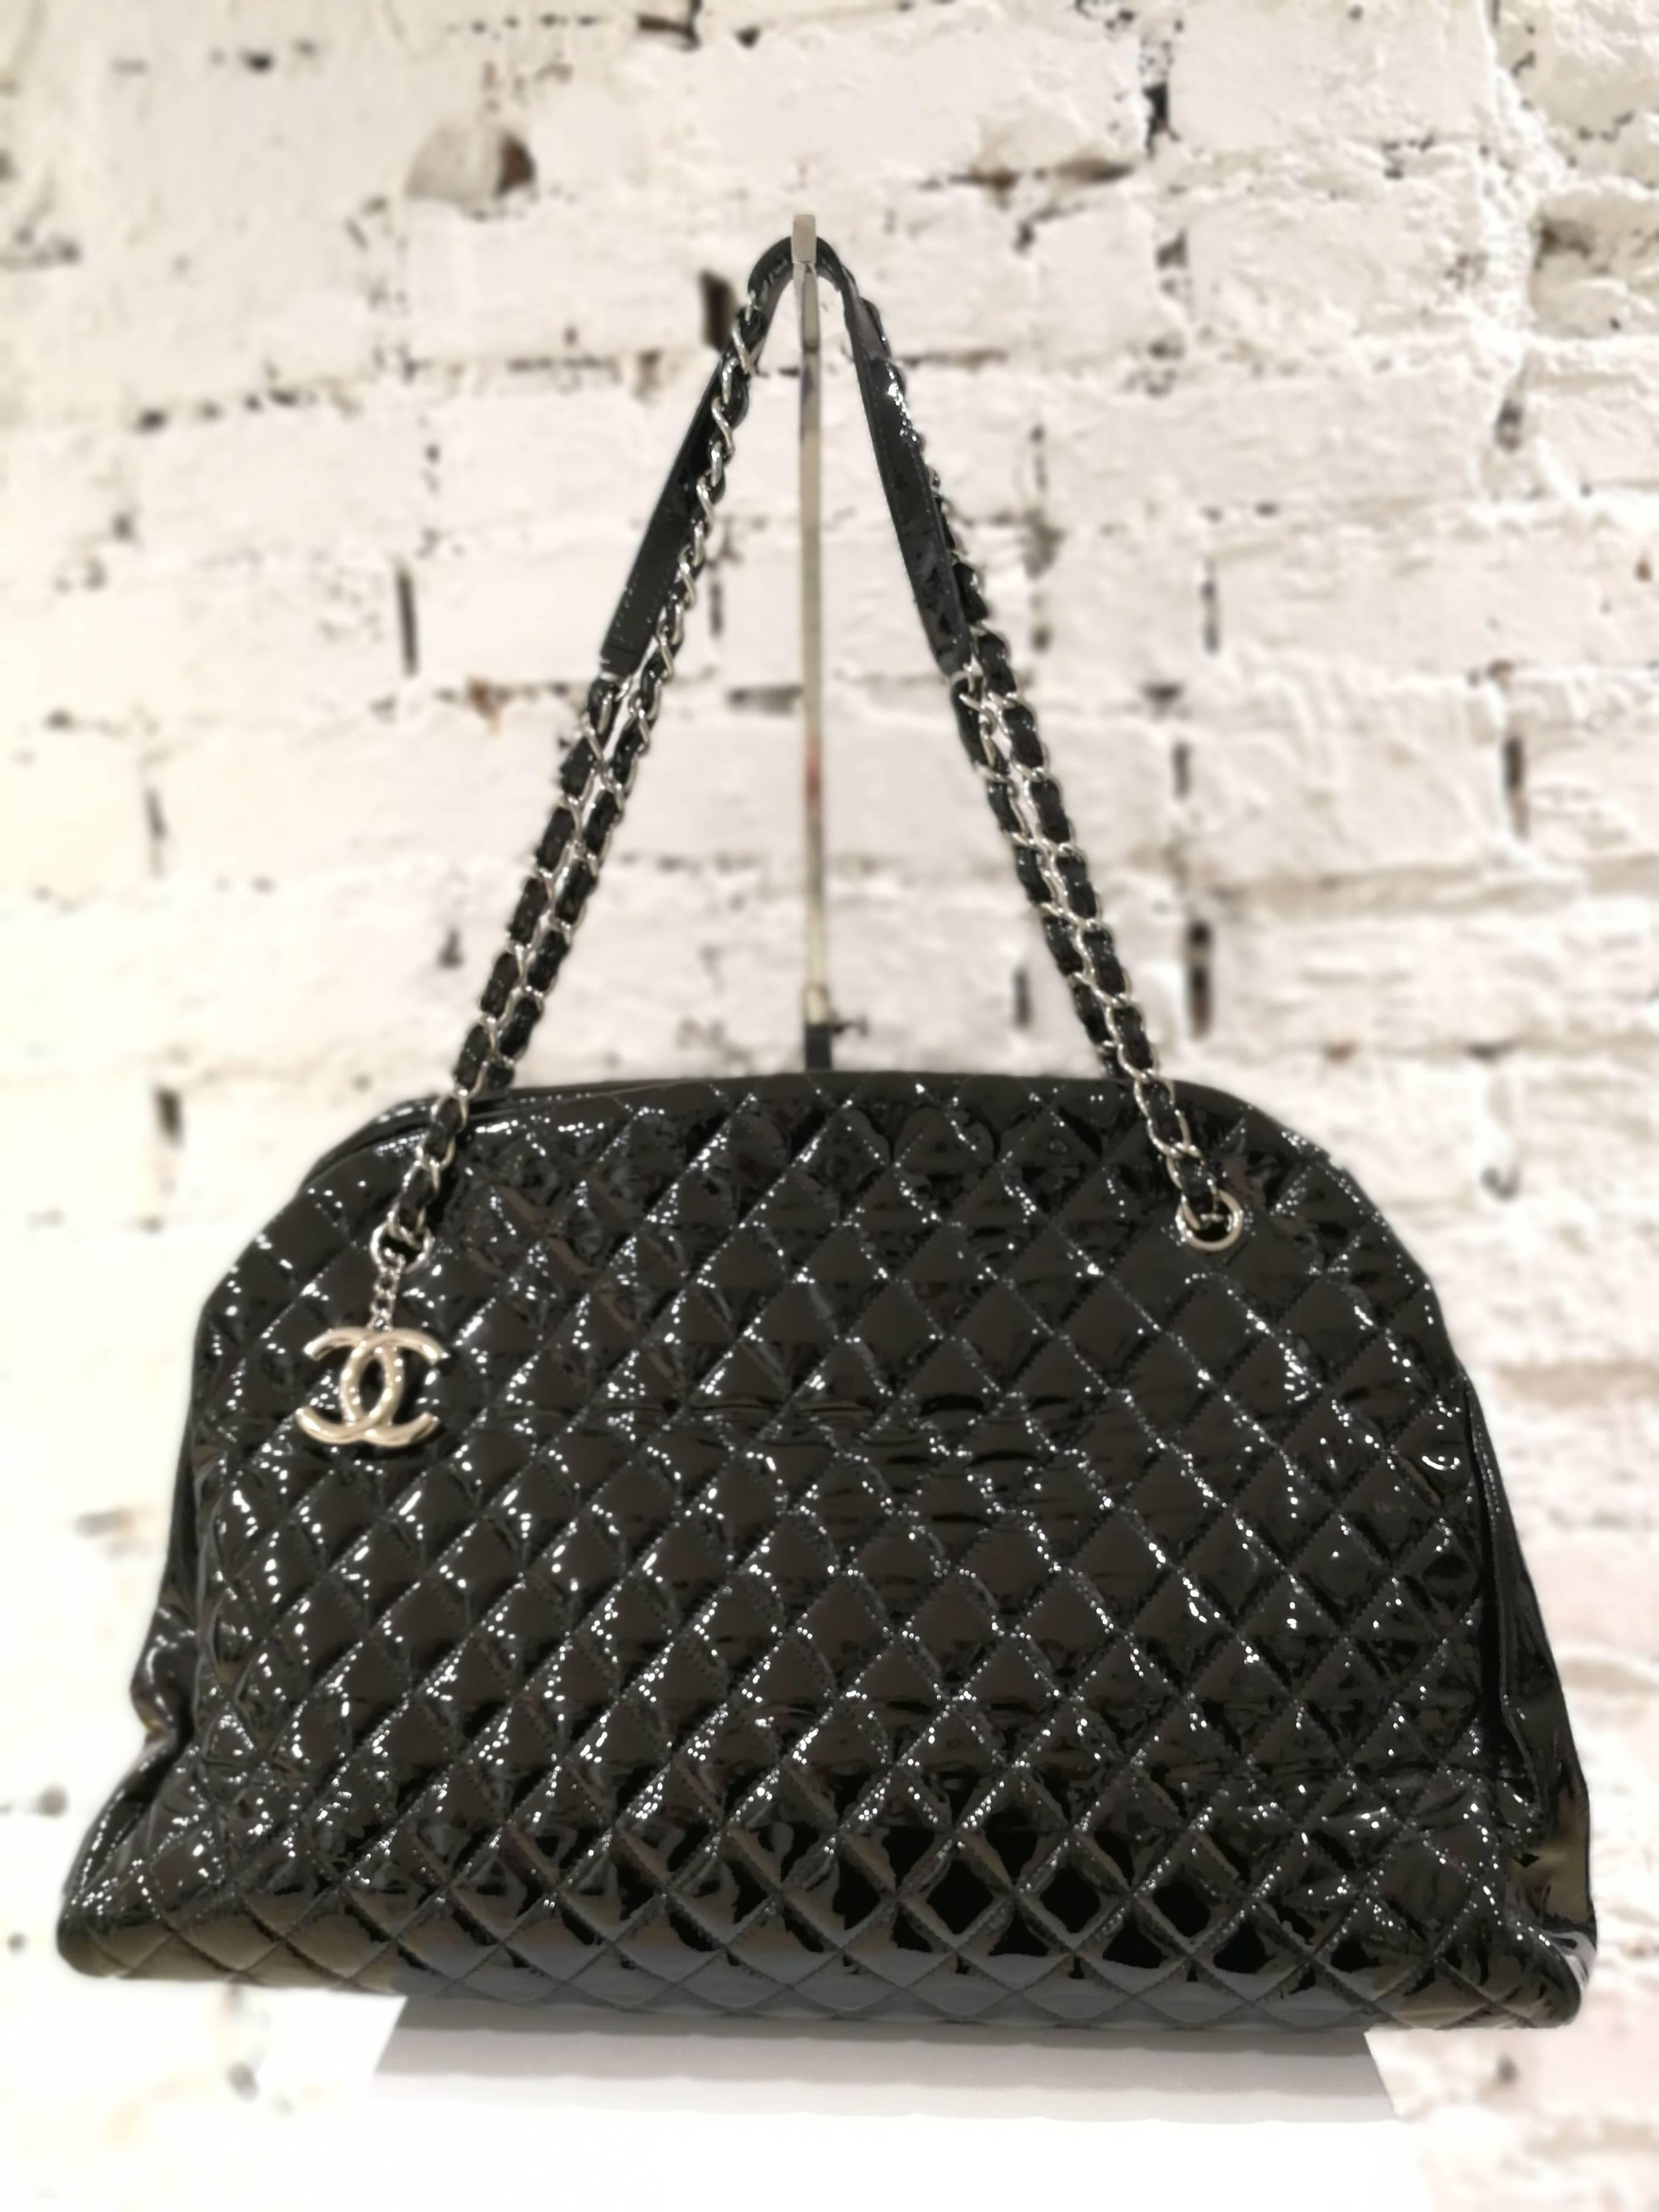 Chanel Just Mademoiselle Bowler Black patent Leather Bag 5